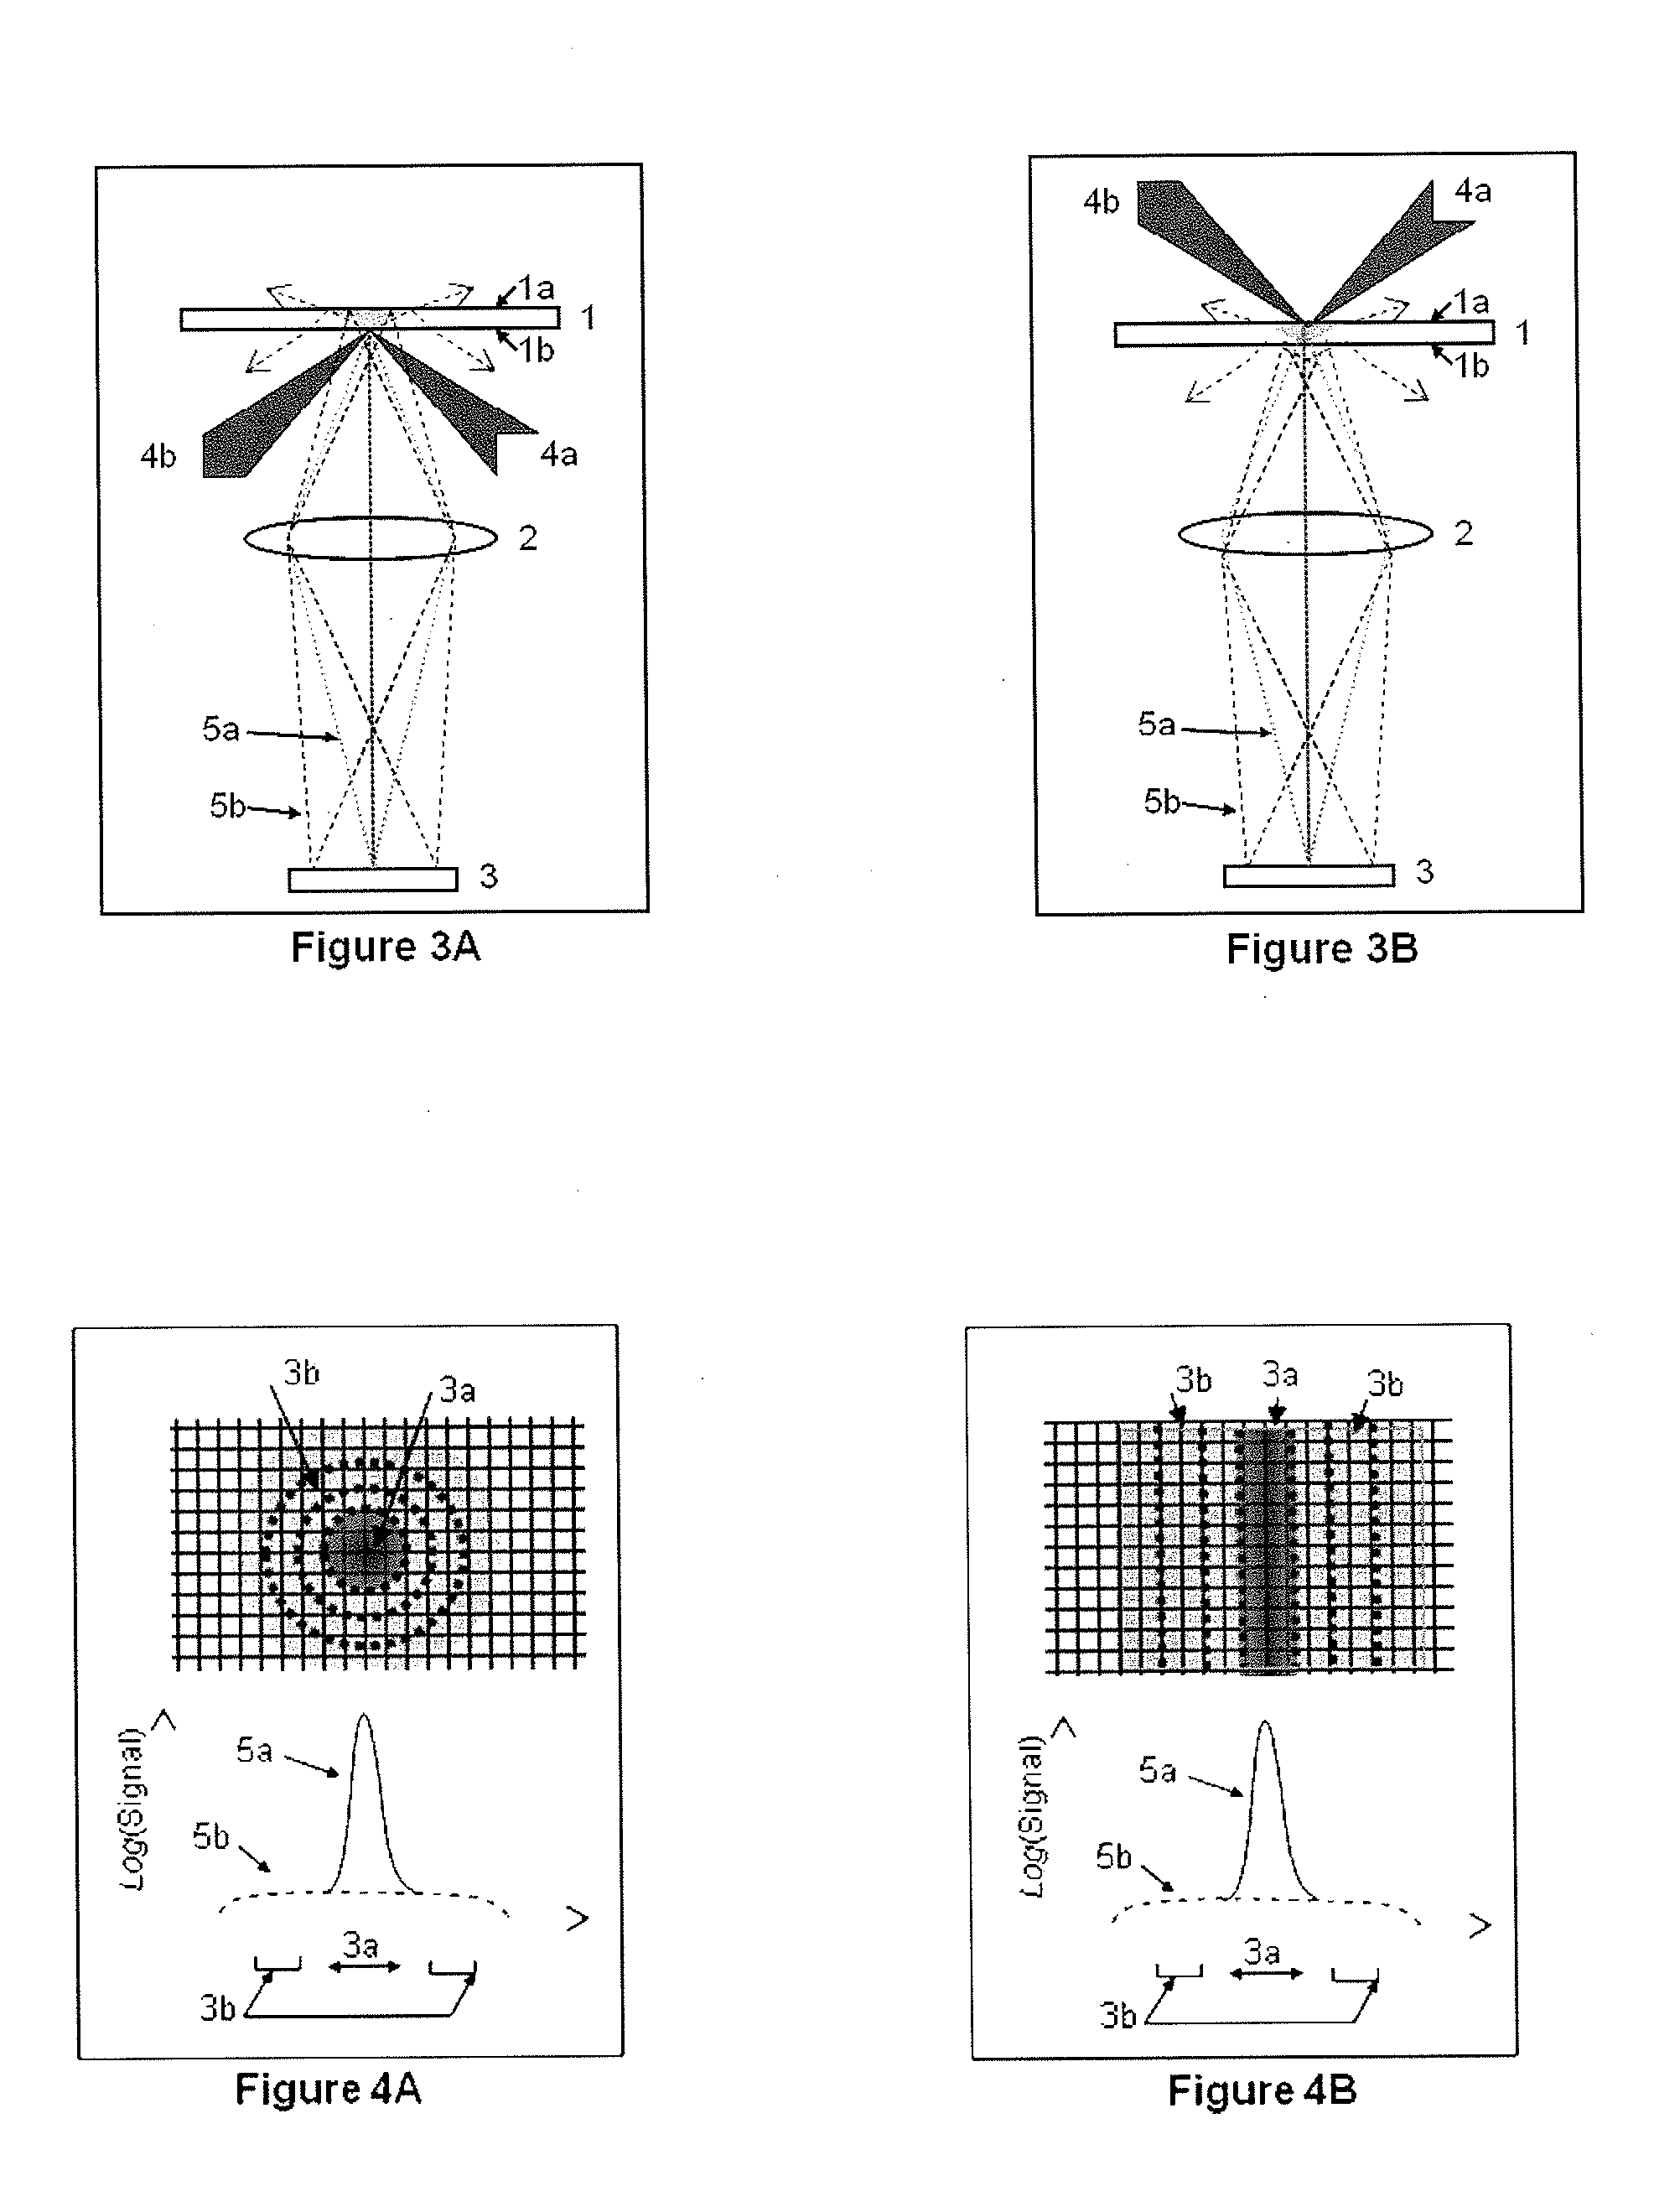 Differential scan imaging systems and methods